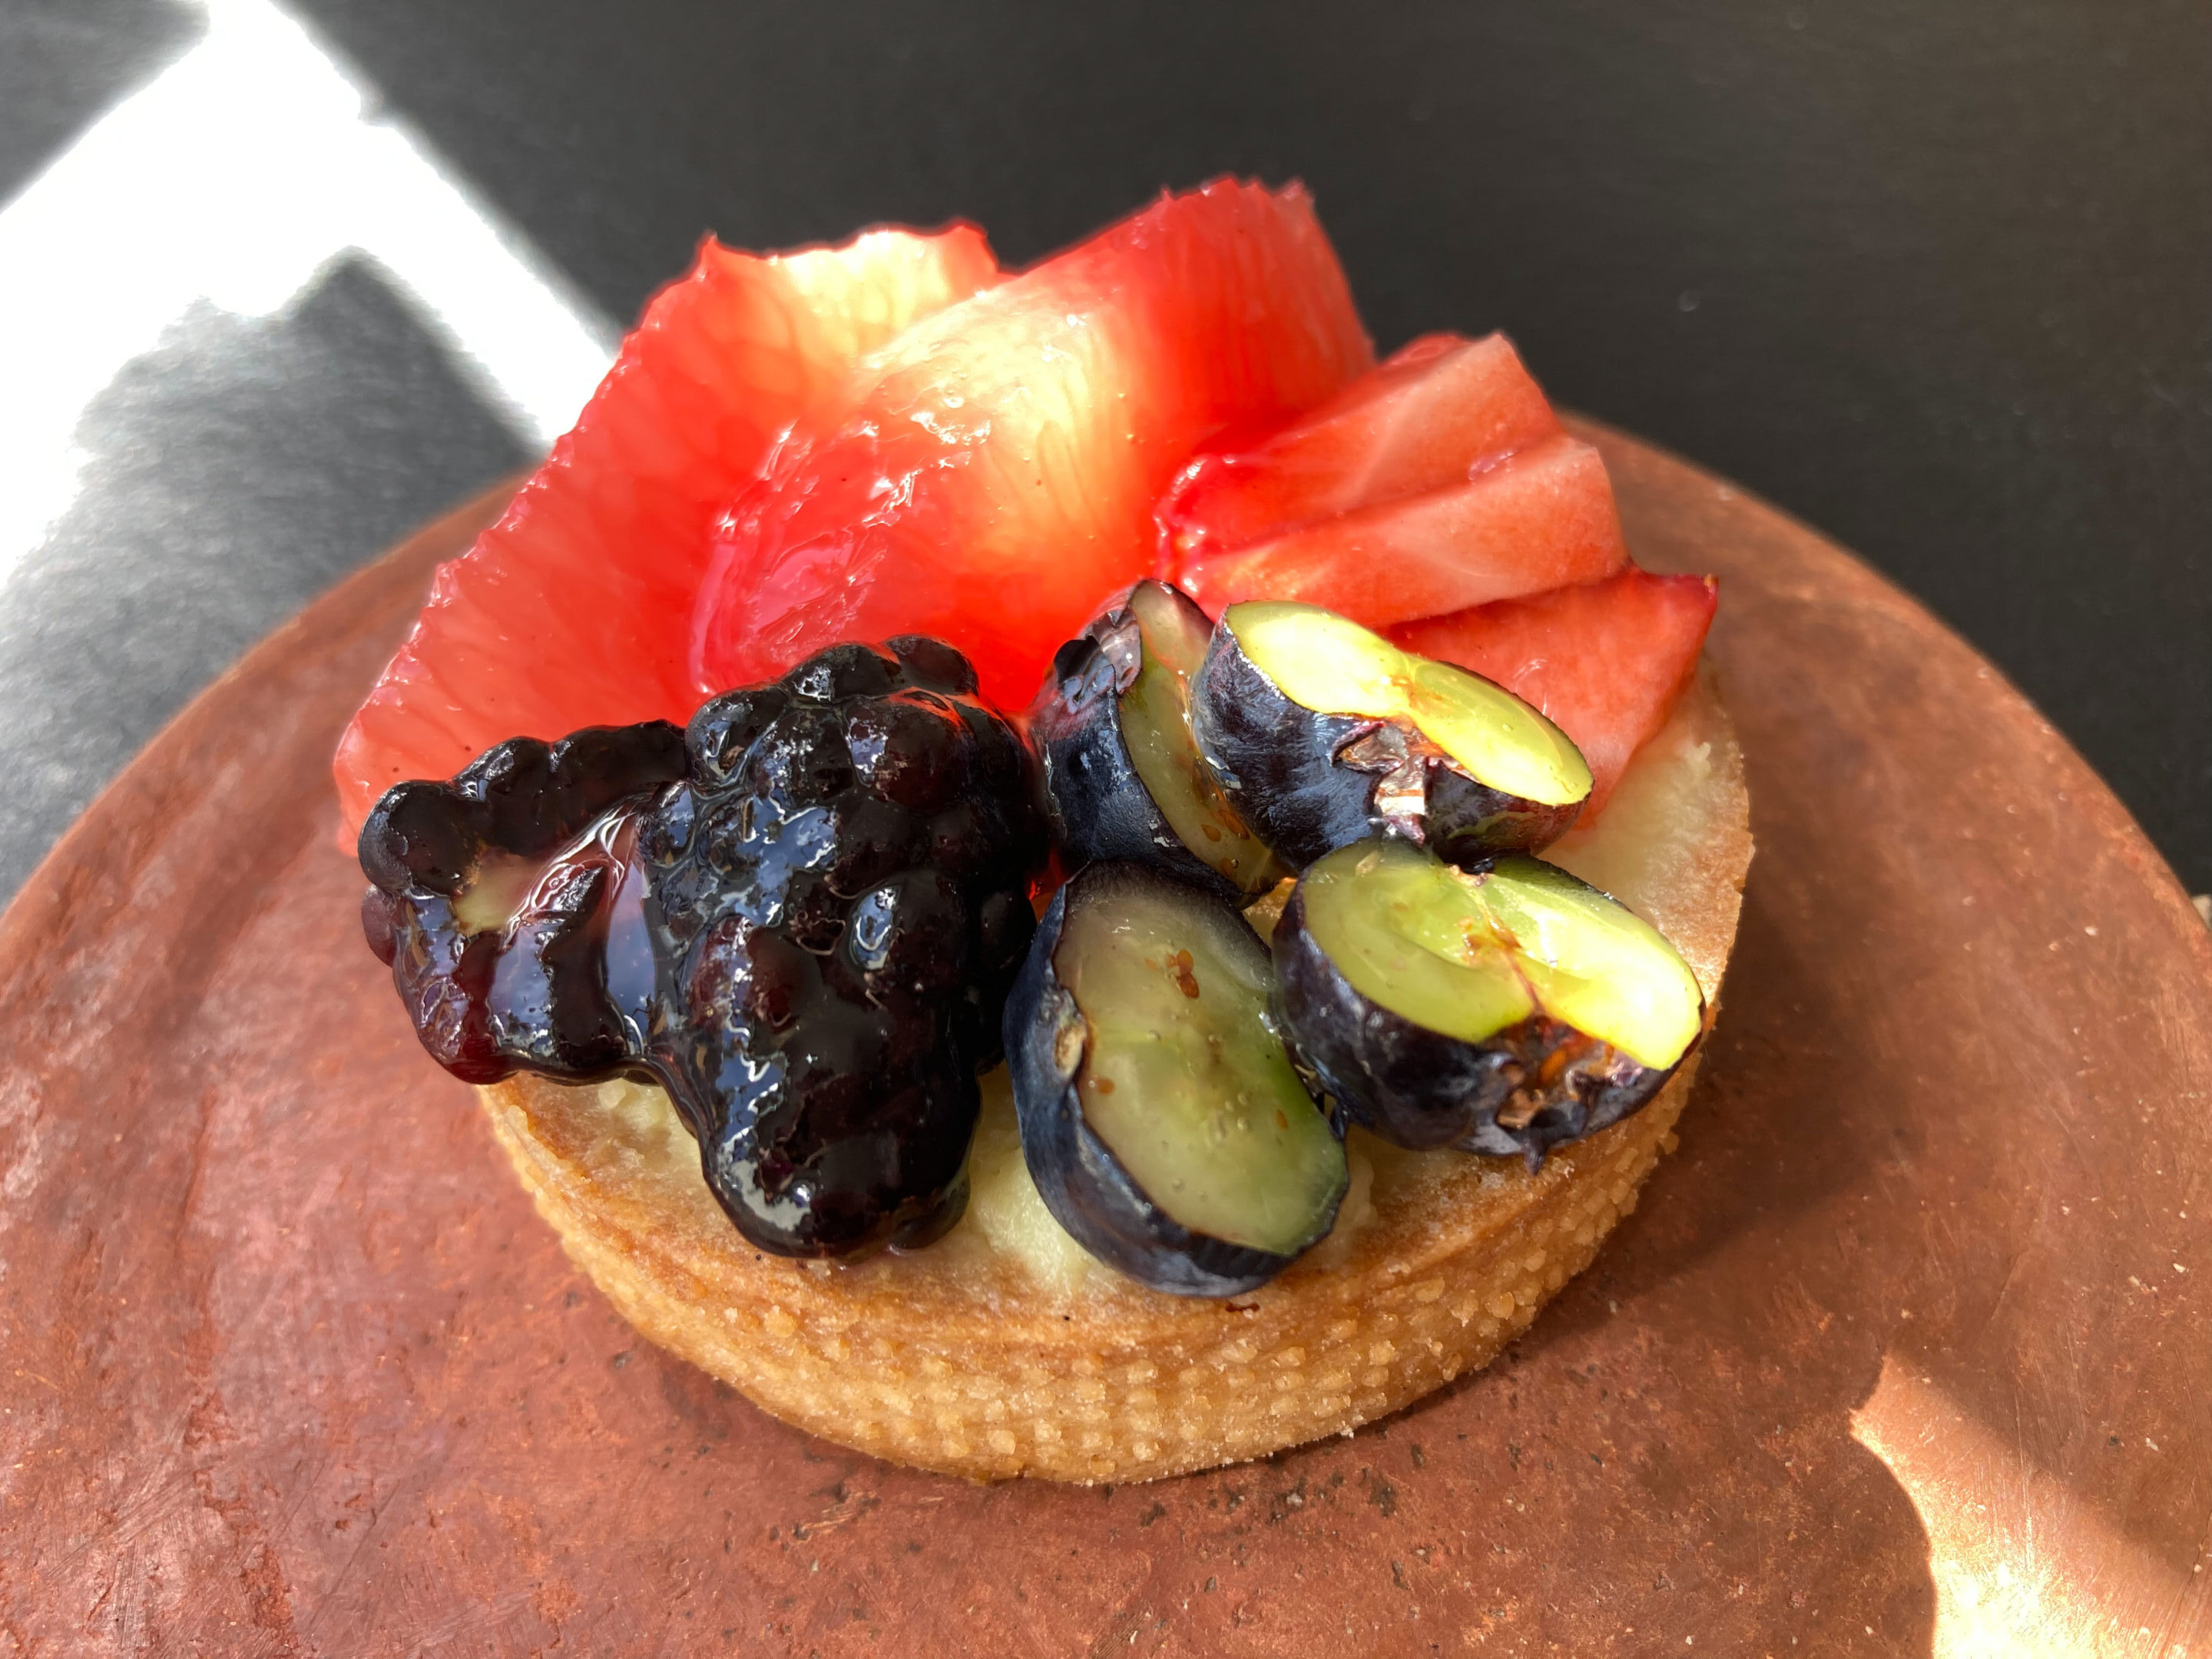 Image of Belleville's fruit tart, topped with a variety of fruits including black berries, blueberries, strawberries.